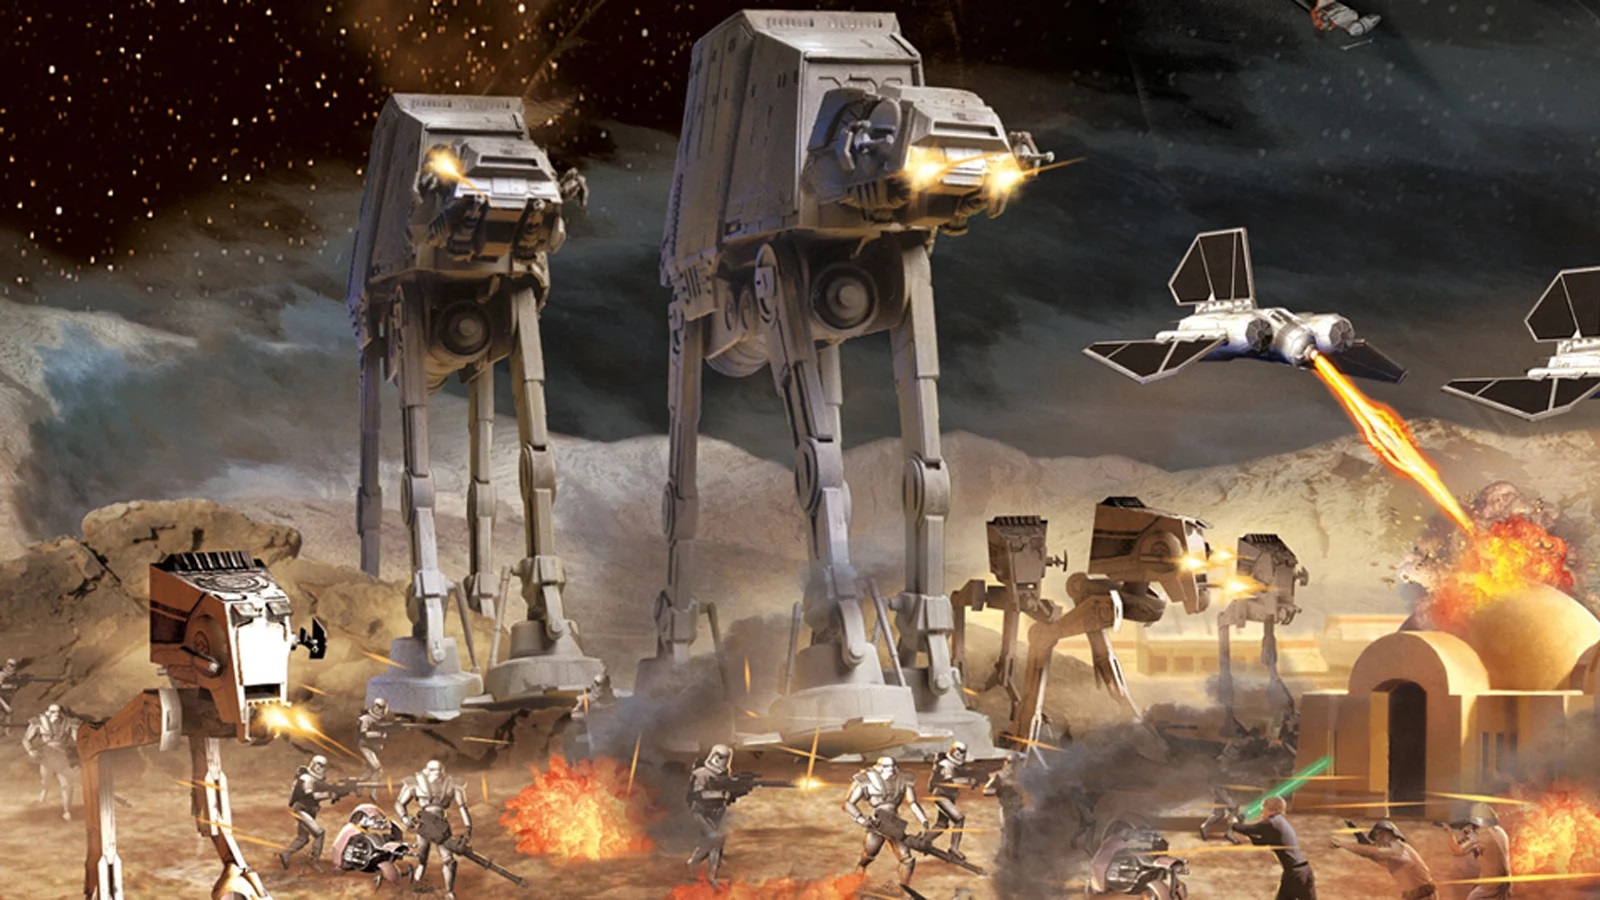 Classic Star Wars RTS receives major update 17 years after launch